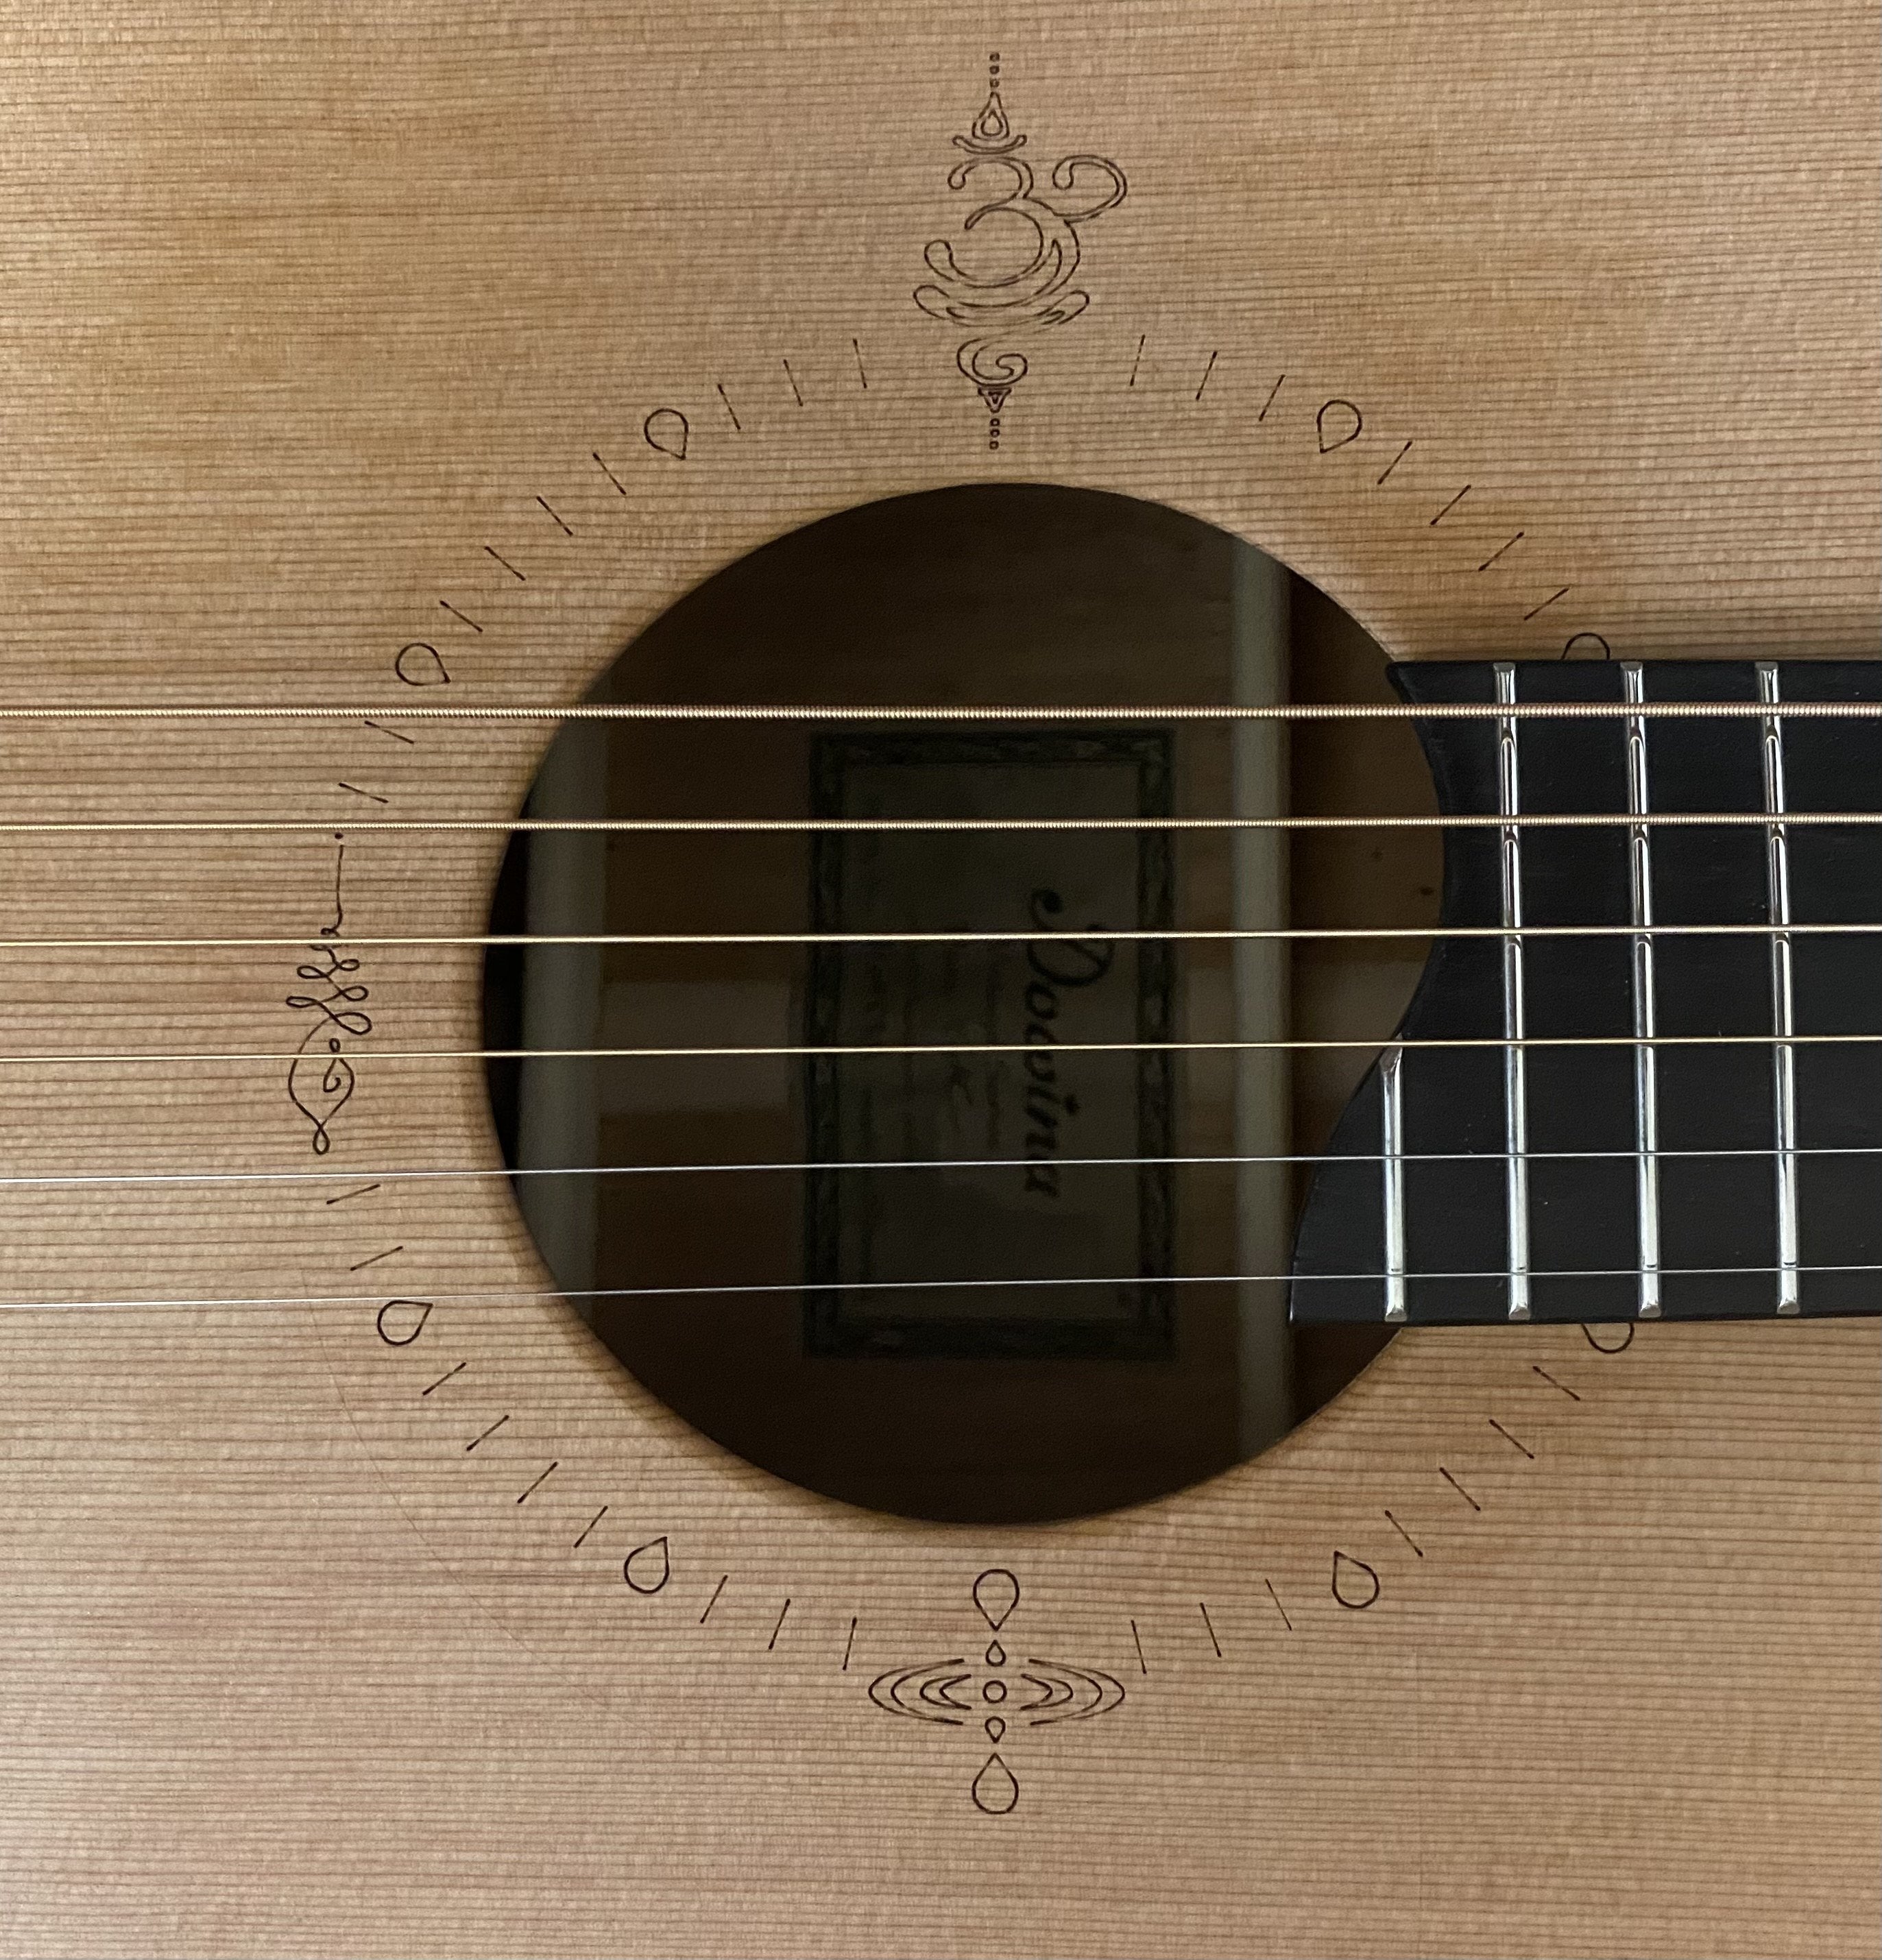 Dowina Pure GAC Left Handed - The Worlds Finest Value Hand Made Acoustic Guitar?, Acoustic Guitar for sale at Richards Guitars.